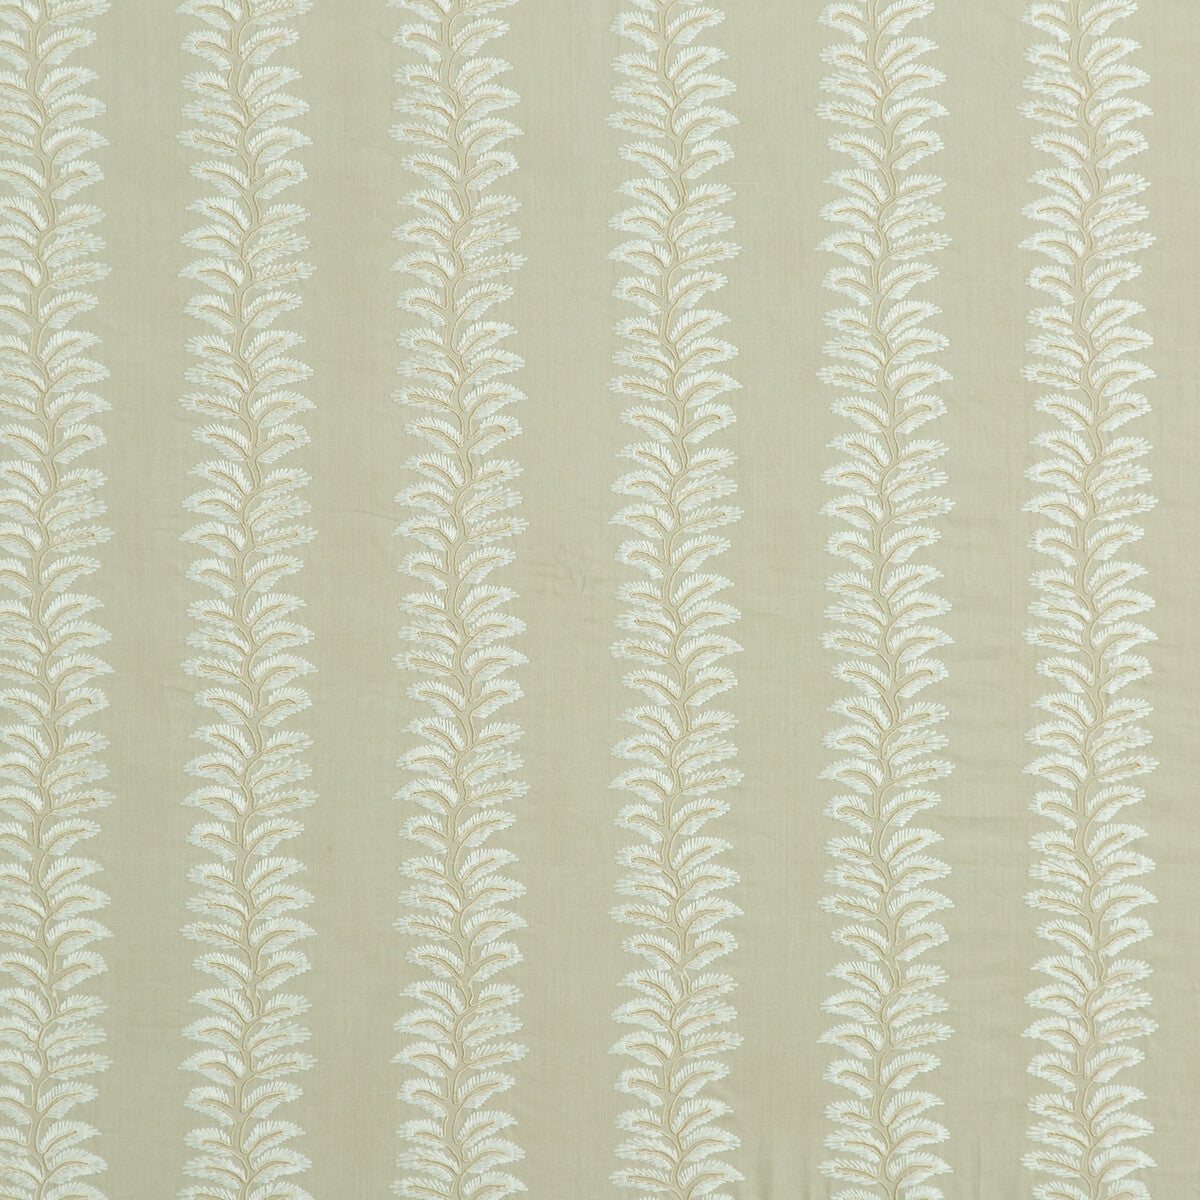 Bradbourne fabric in stone color - pattern BF10533.140.0 - by G P &amp; J Baker in the Langdale collection